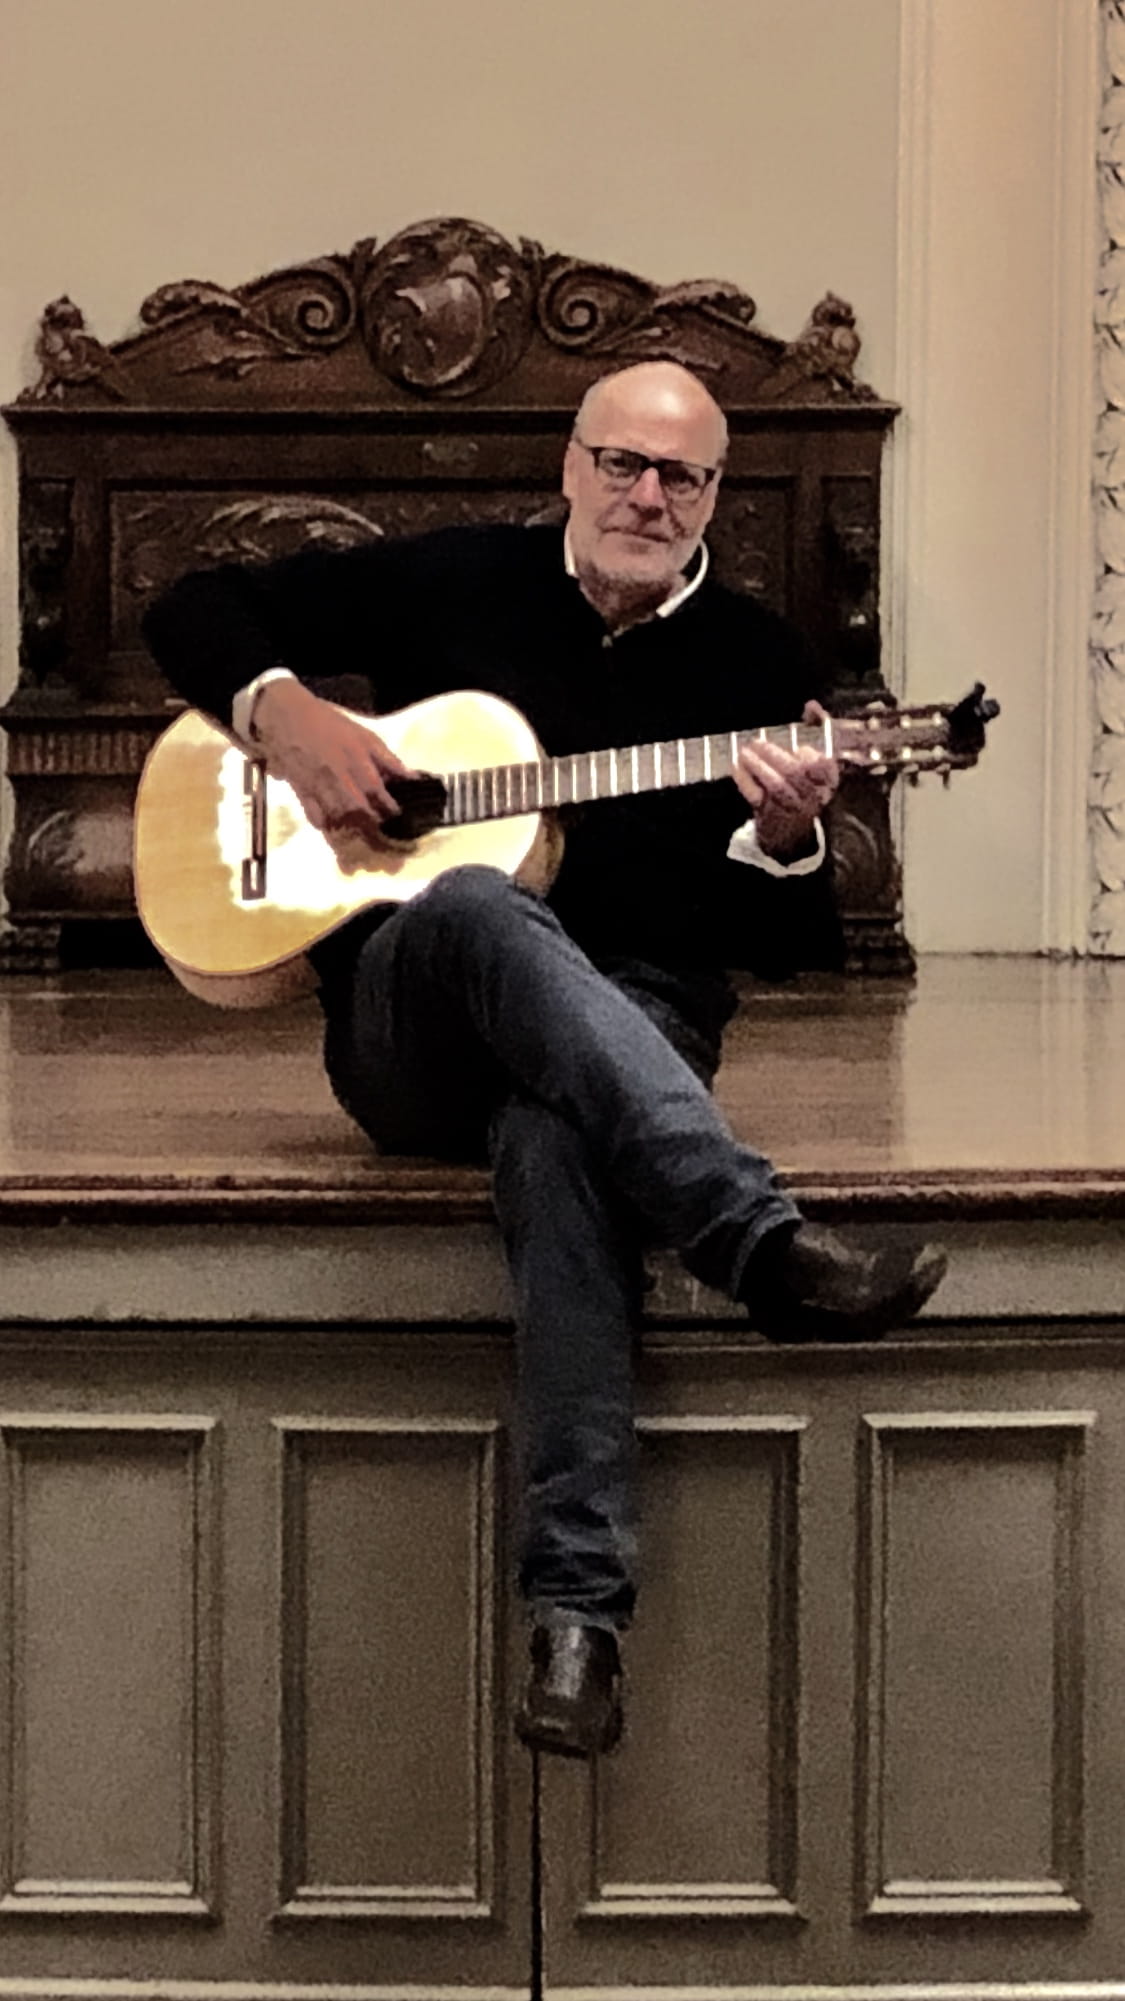 A man sitting on a stage and posing with a classical guitar.